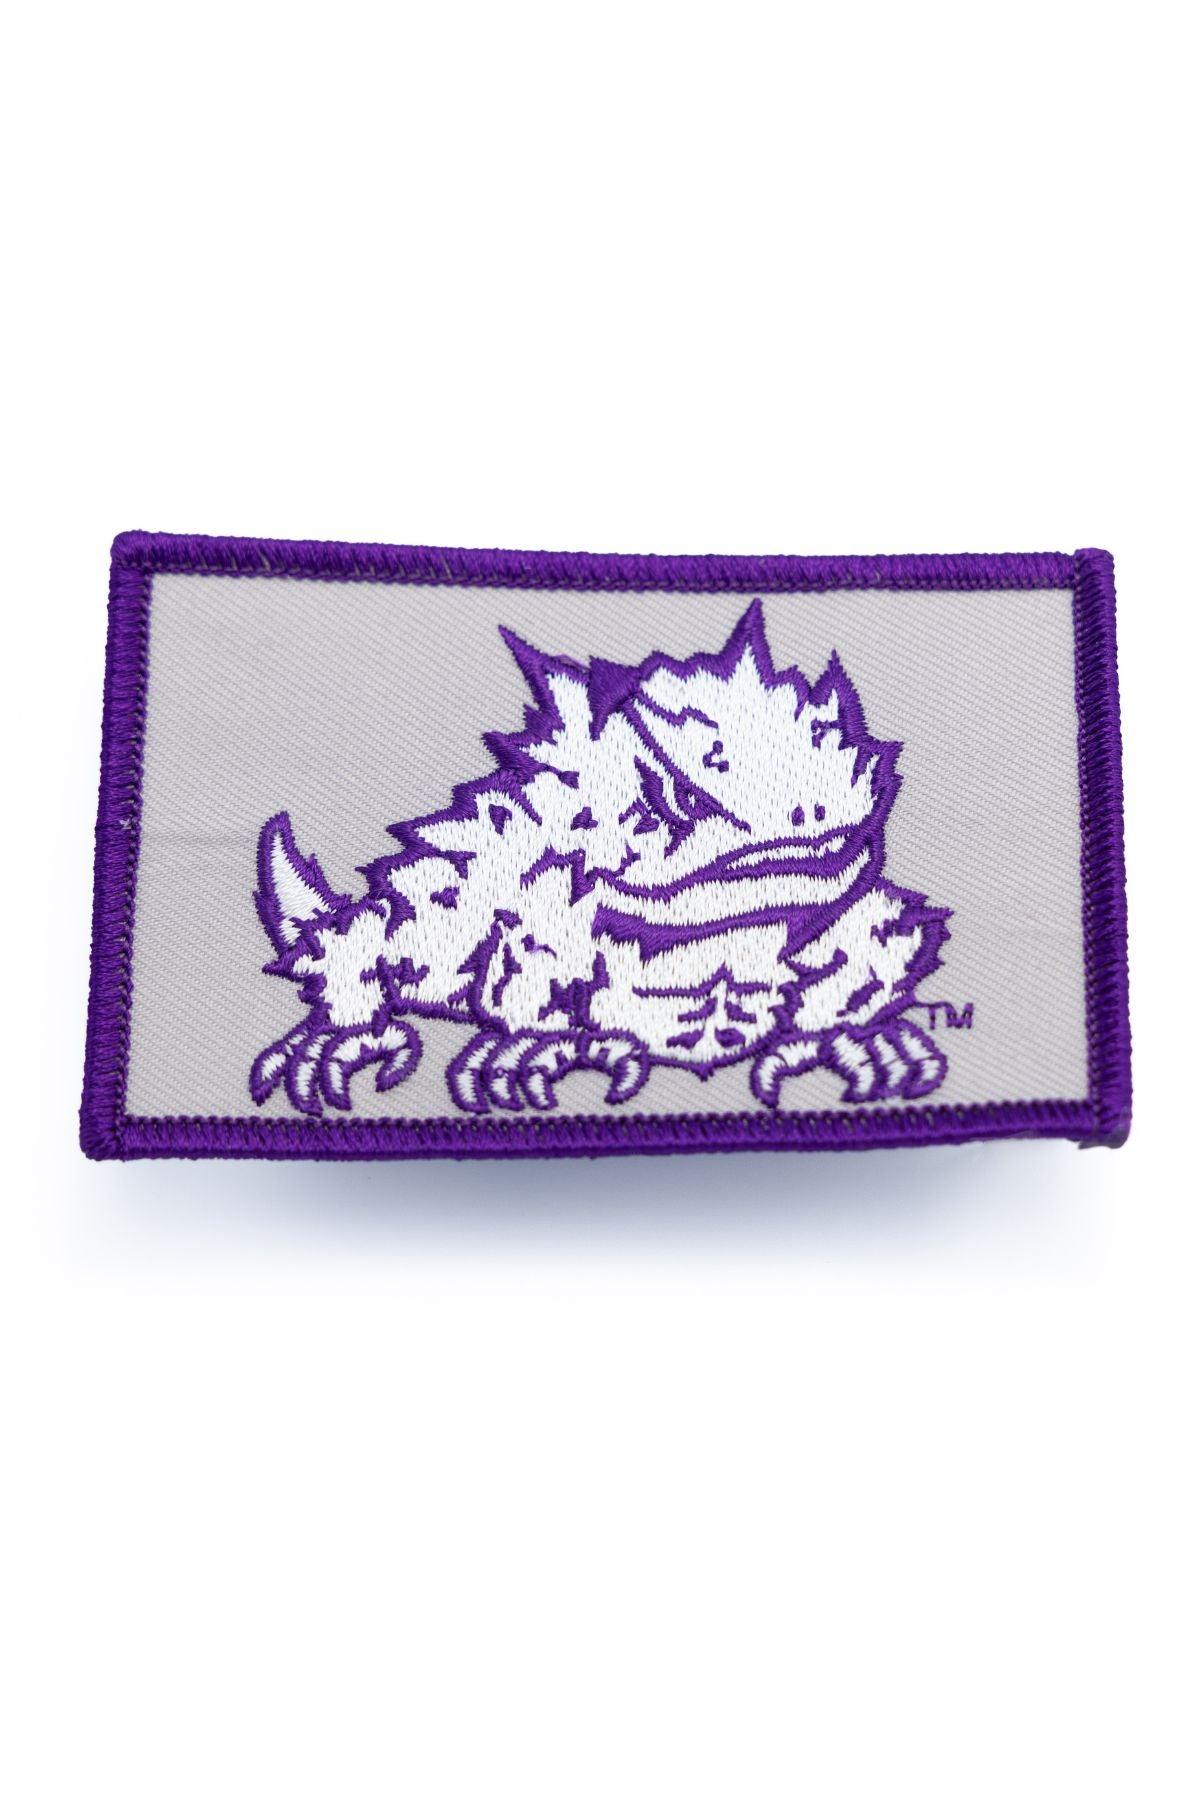 TCU HORN FROG EMBROIDERED PATCH - Cowboy Snapback